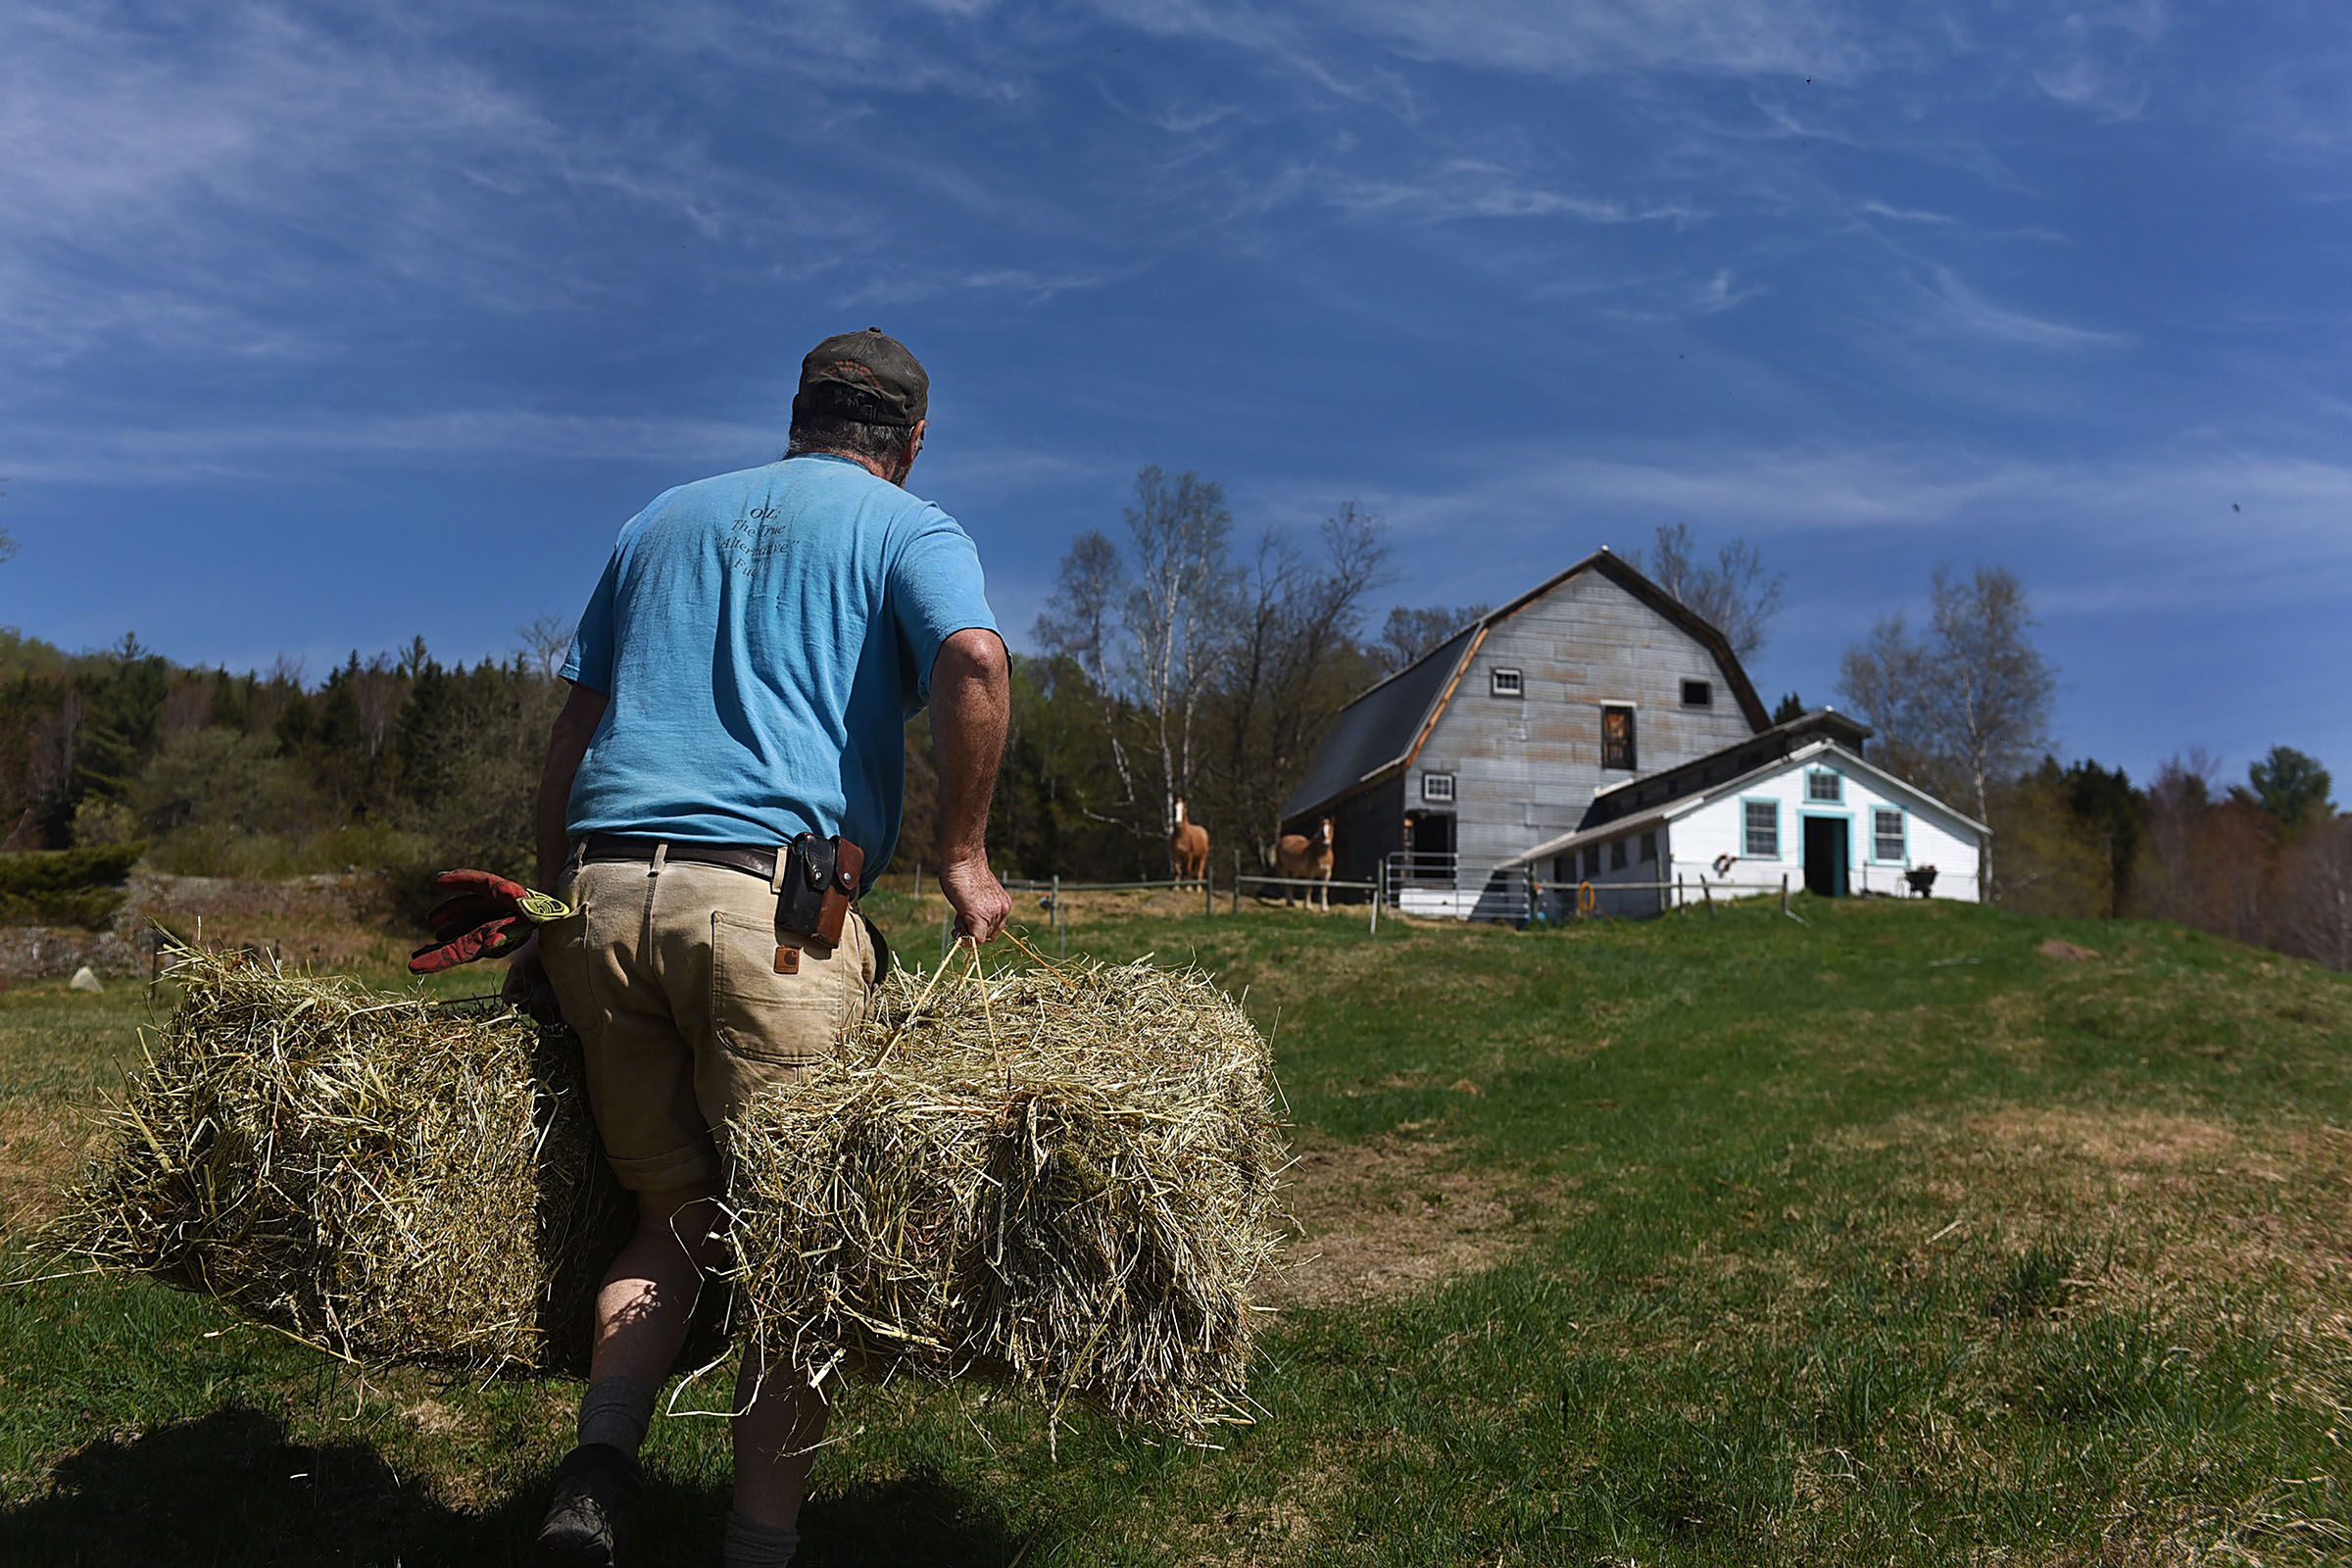 Carl Russell, of Bethel, Vt., hauls two bales of hay from his farm to where his two new horses, Mike and Tom live at Stitchdown Farm in Bethel, Vt., on May 8, 2015. Russell "adopted" the draft horses in February, and has worked put more weight on both the horses, who were malnourished when he acquired them. (Valley News - Sarah Priestap) Copyright Valley News. May not be reprinted or used online without permission. Send requests to permission@vnews.com.